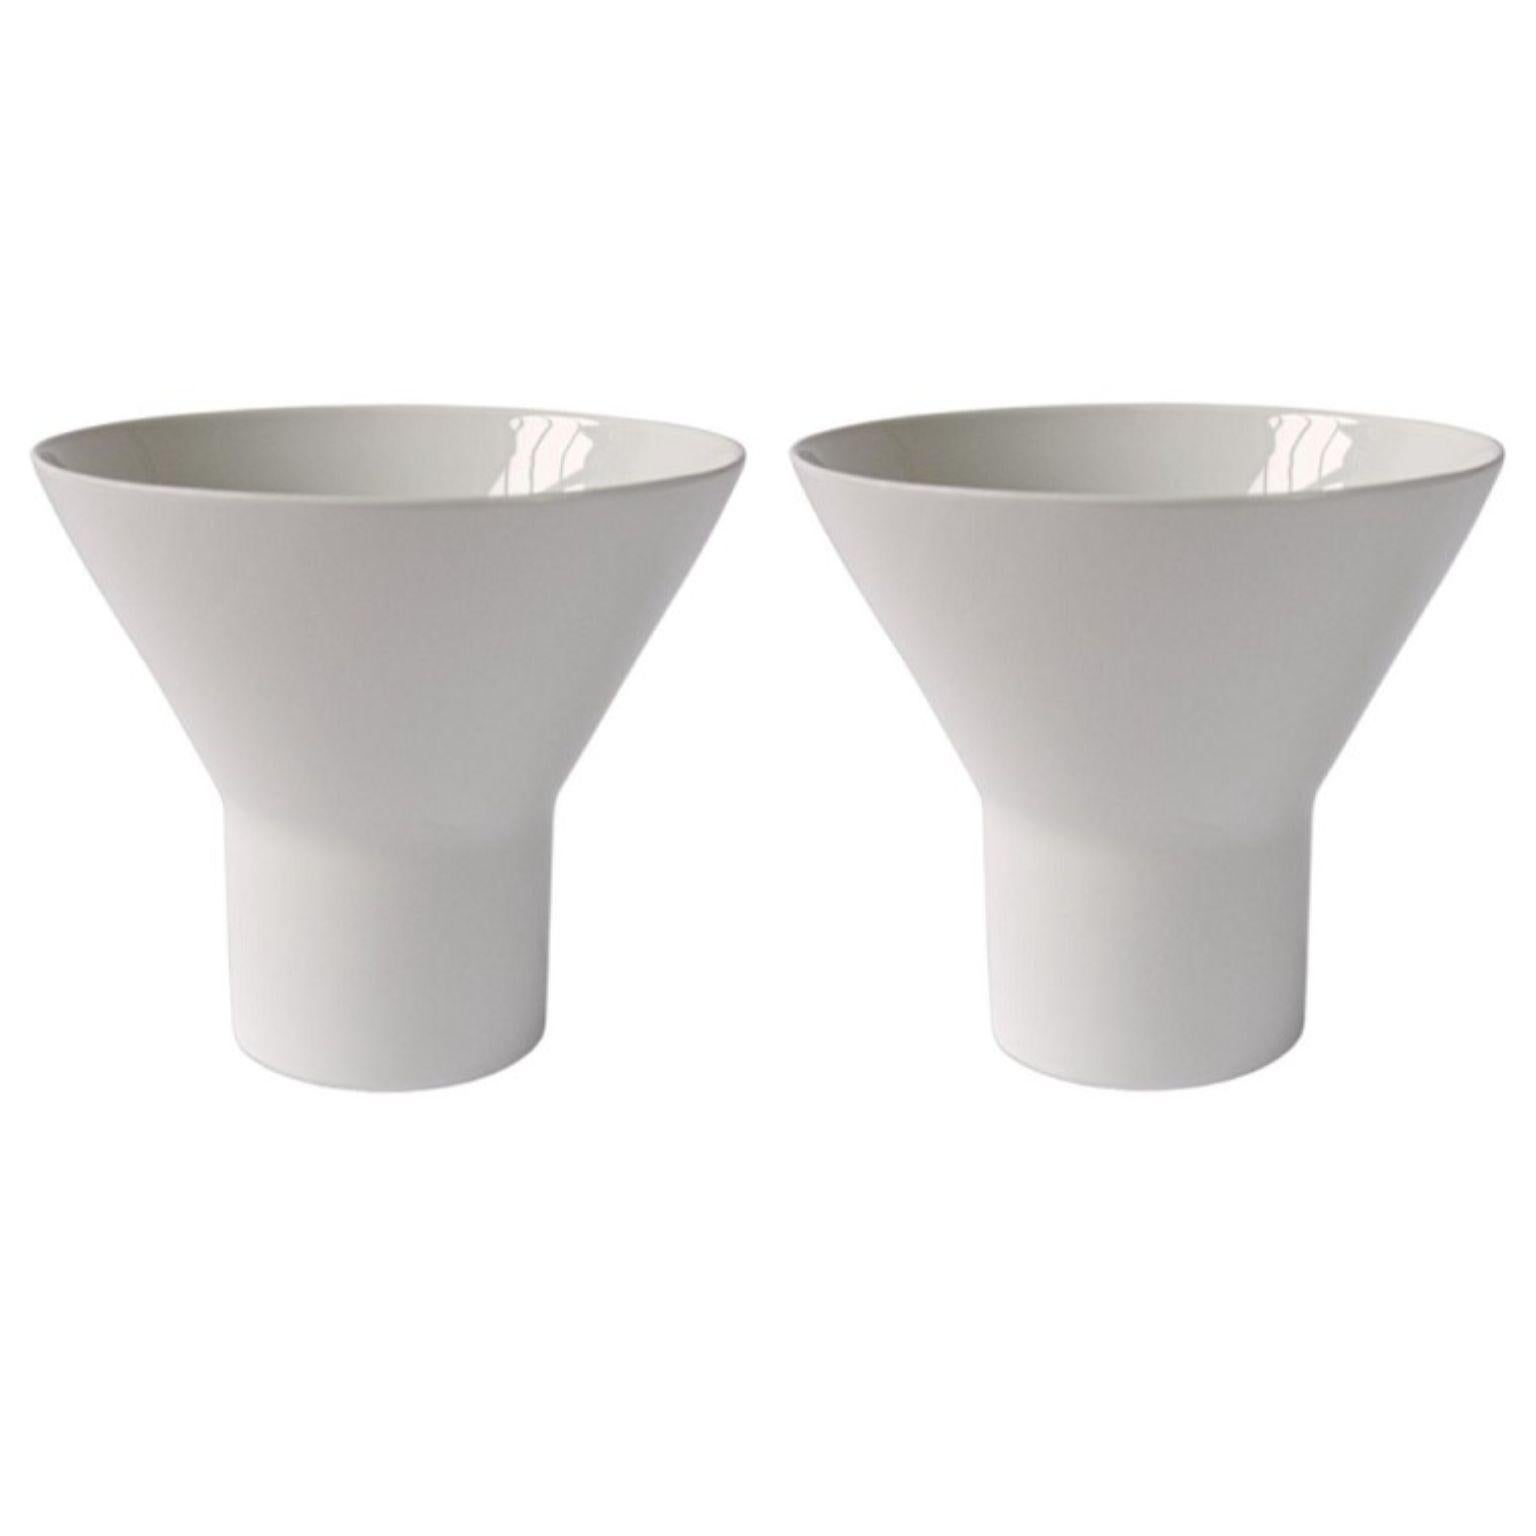 Set of 2 large white Ceramic KYO Vases by Mazo Design
Dimensions: D 29 x H 26 cm
Materials: Glazed Ceramic.

Both functional and sculptural, the new collection from mazo is very Scandinavian and Japanese at the same time. The series consists of